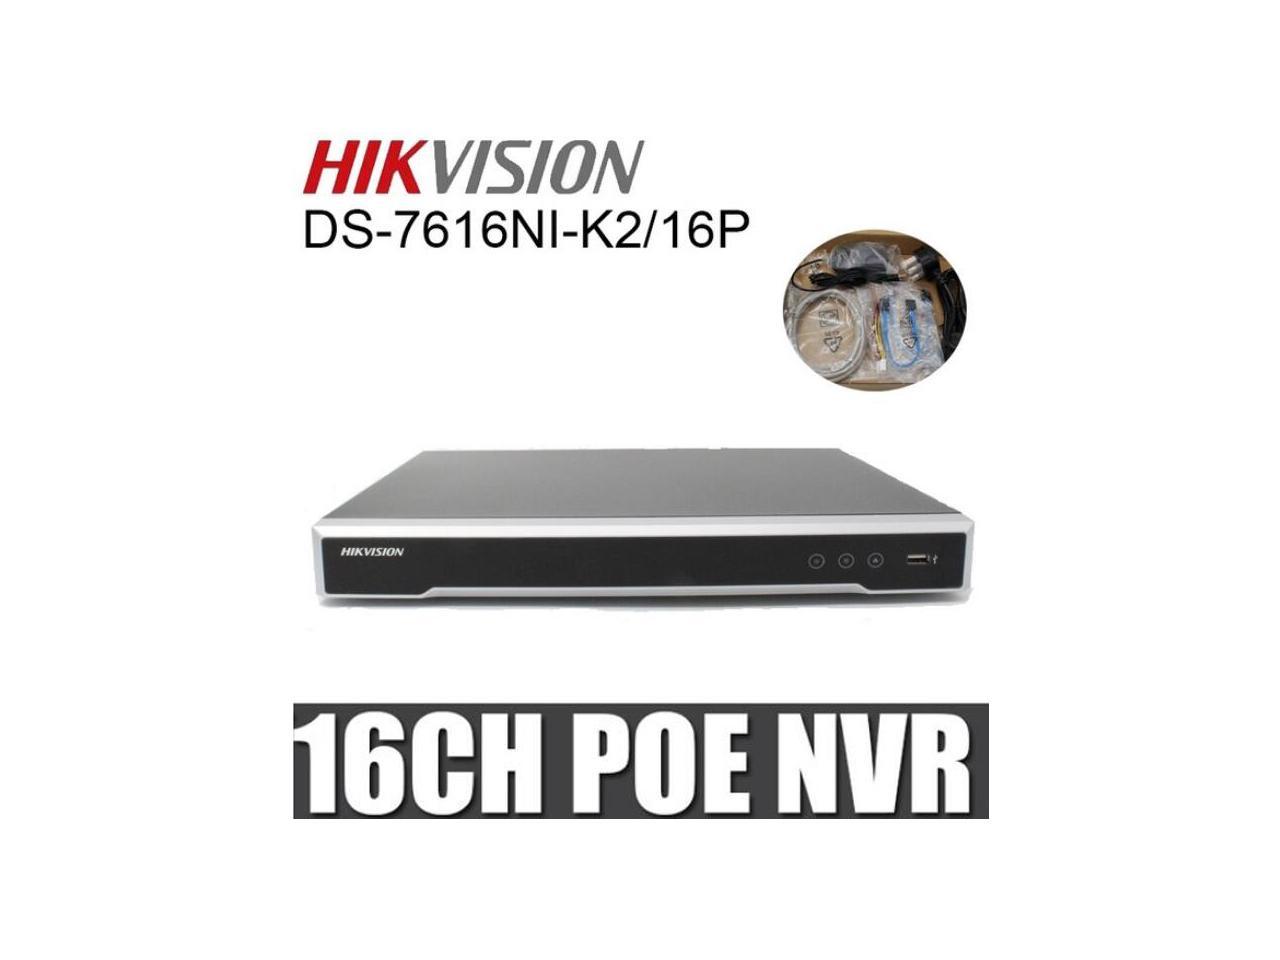 Ship from Canada Replacement of DS-7616NI-E2/16P Hikvision 16 Channel 4K NVR DS-7616NI-Q2/16P PoE Embedded Plug & Play Network Video Recorder Support up to 8 MP Resolution Recording